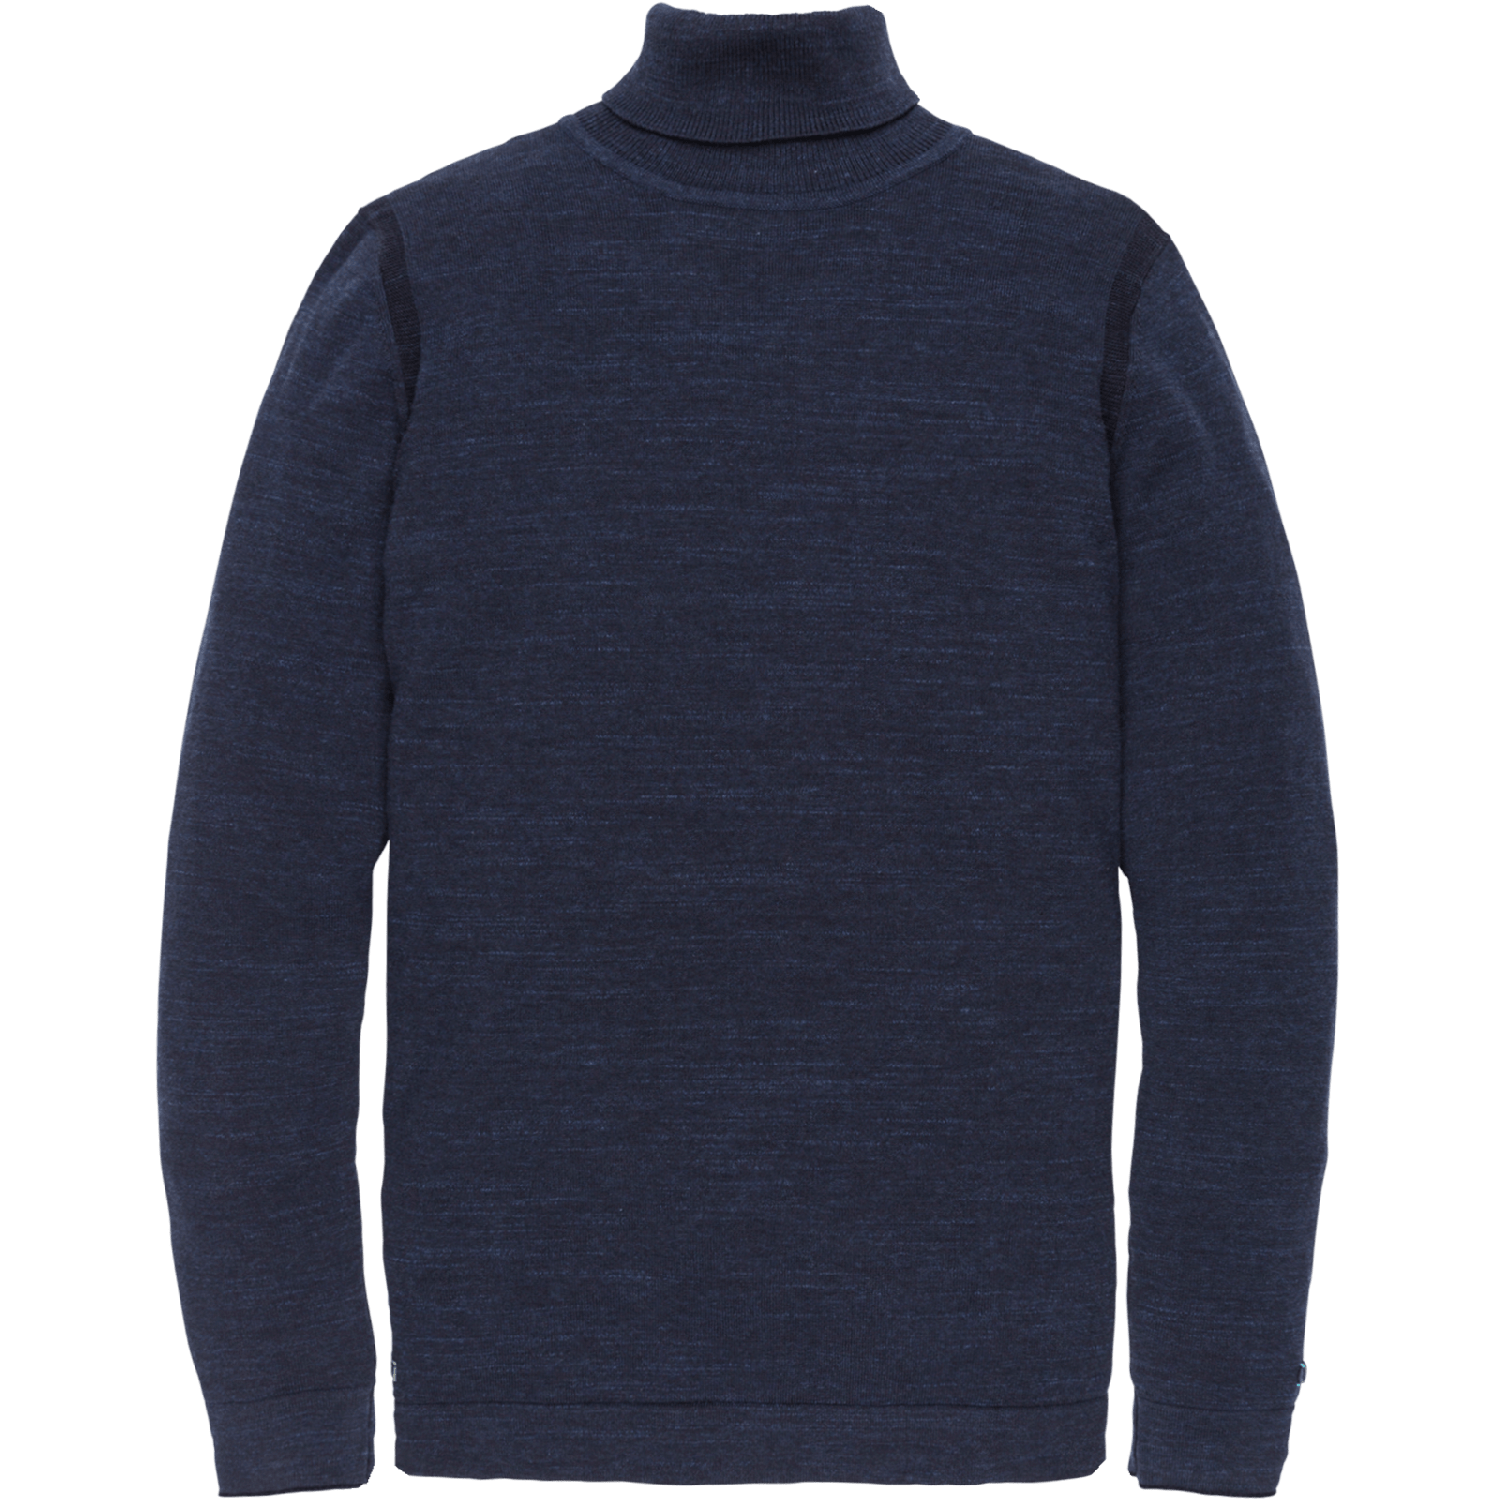 Cast Iron roll neck cotton heather plated dr blues